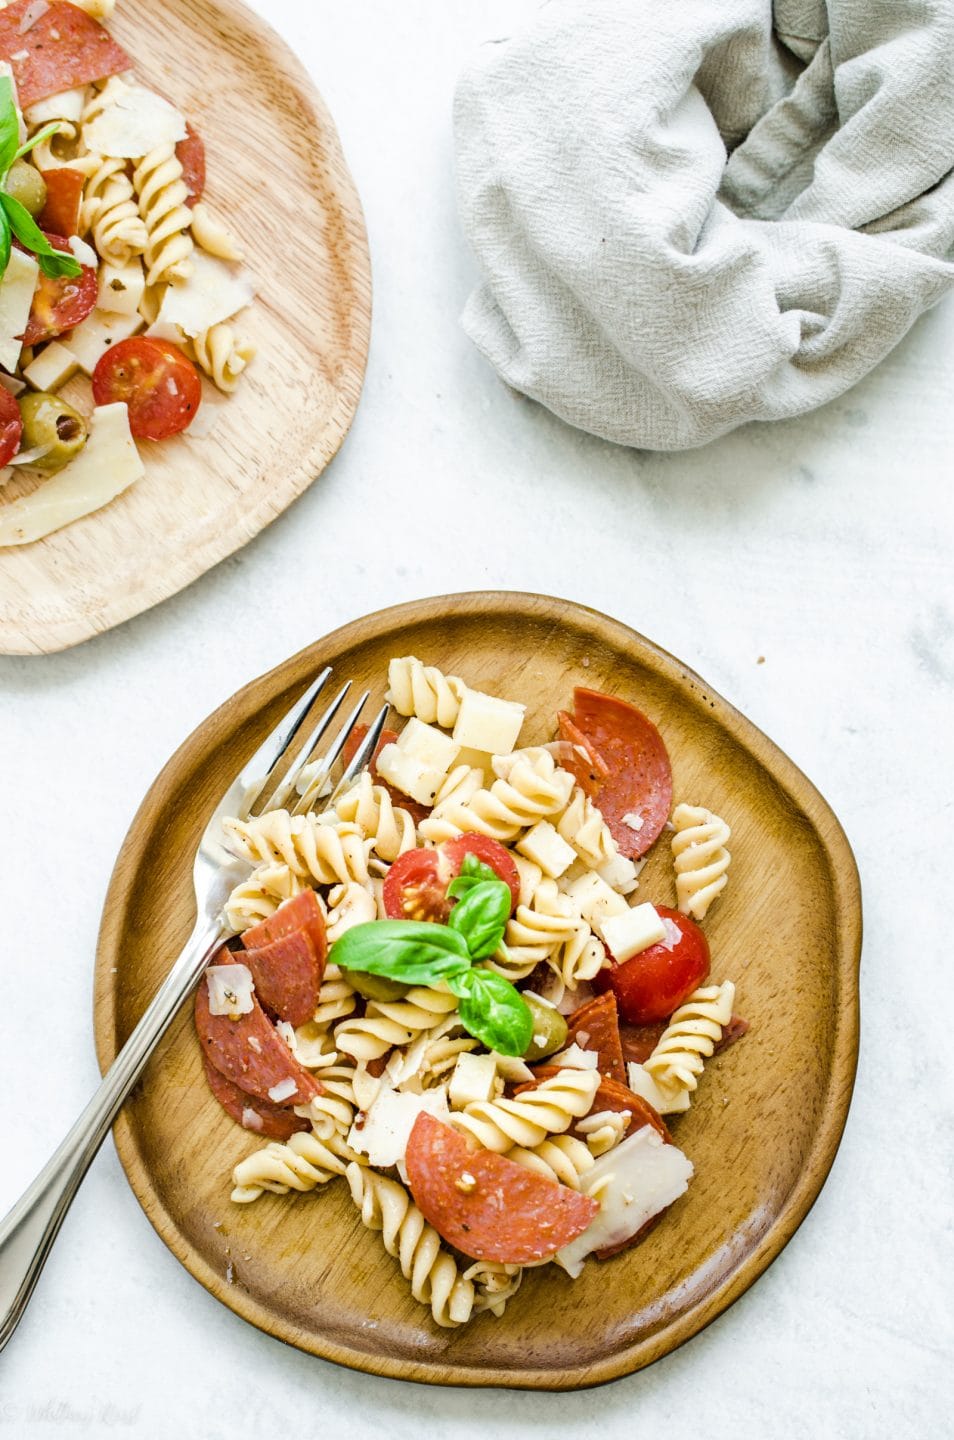 Two wooden plates filled with pizza pasta salad and forks on the side against a white background.